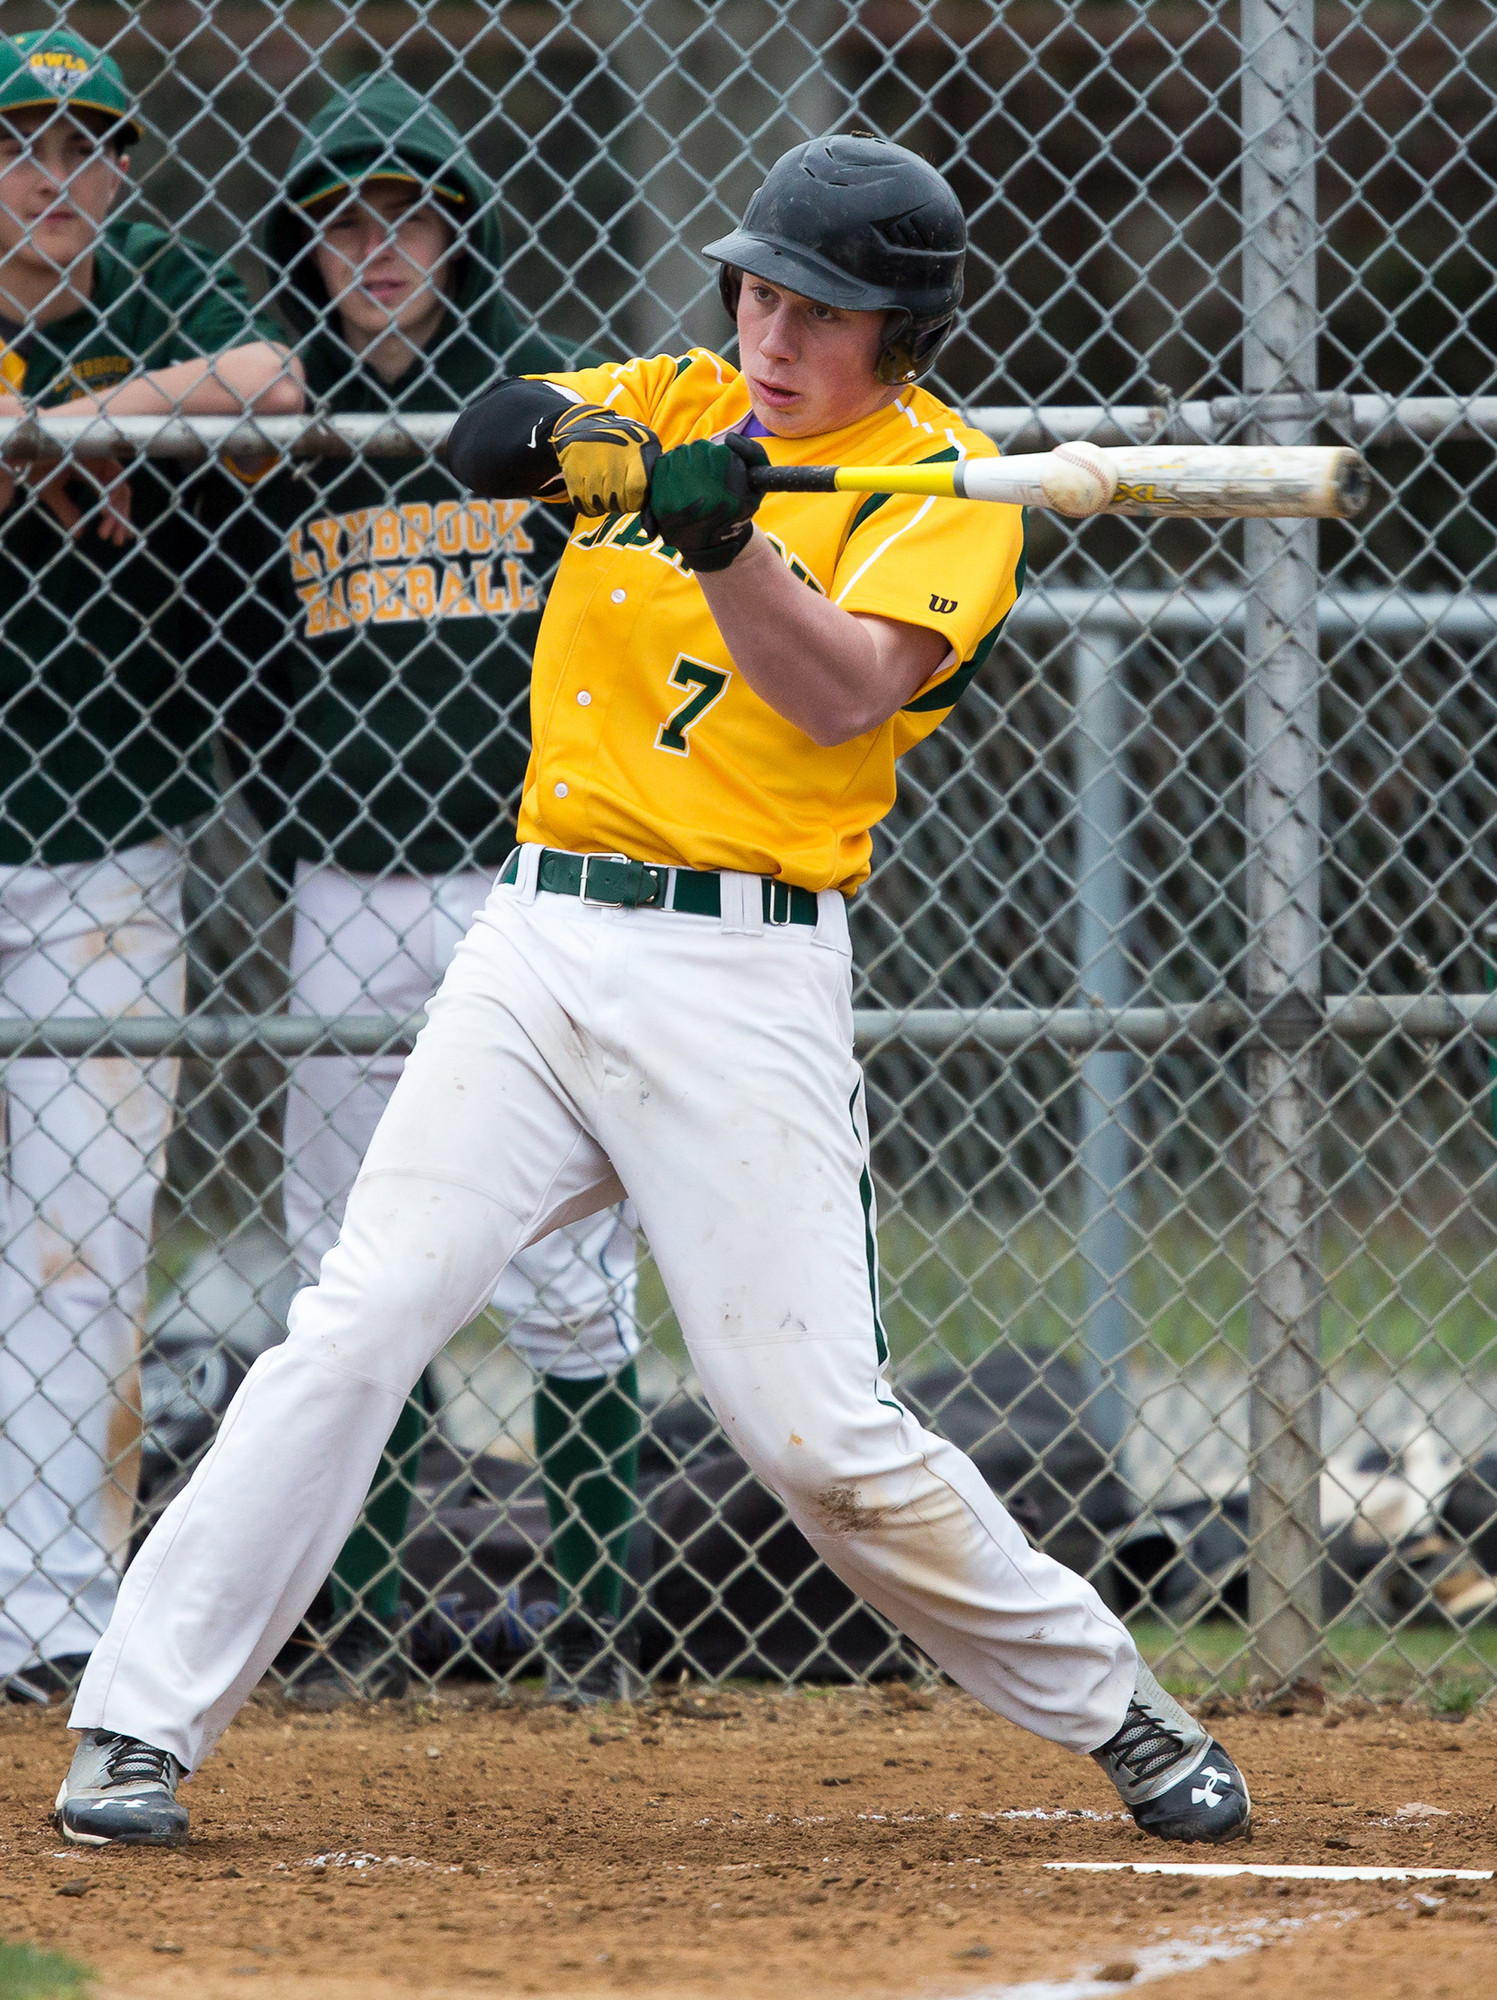 Lynbrook’s Austin Bilello preserved pitcher Paul Papandrew’s no-hitter at Lawrence on April 23 with a diving catch in the outfield.